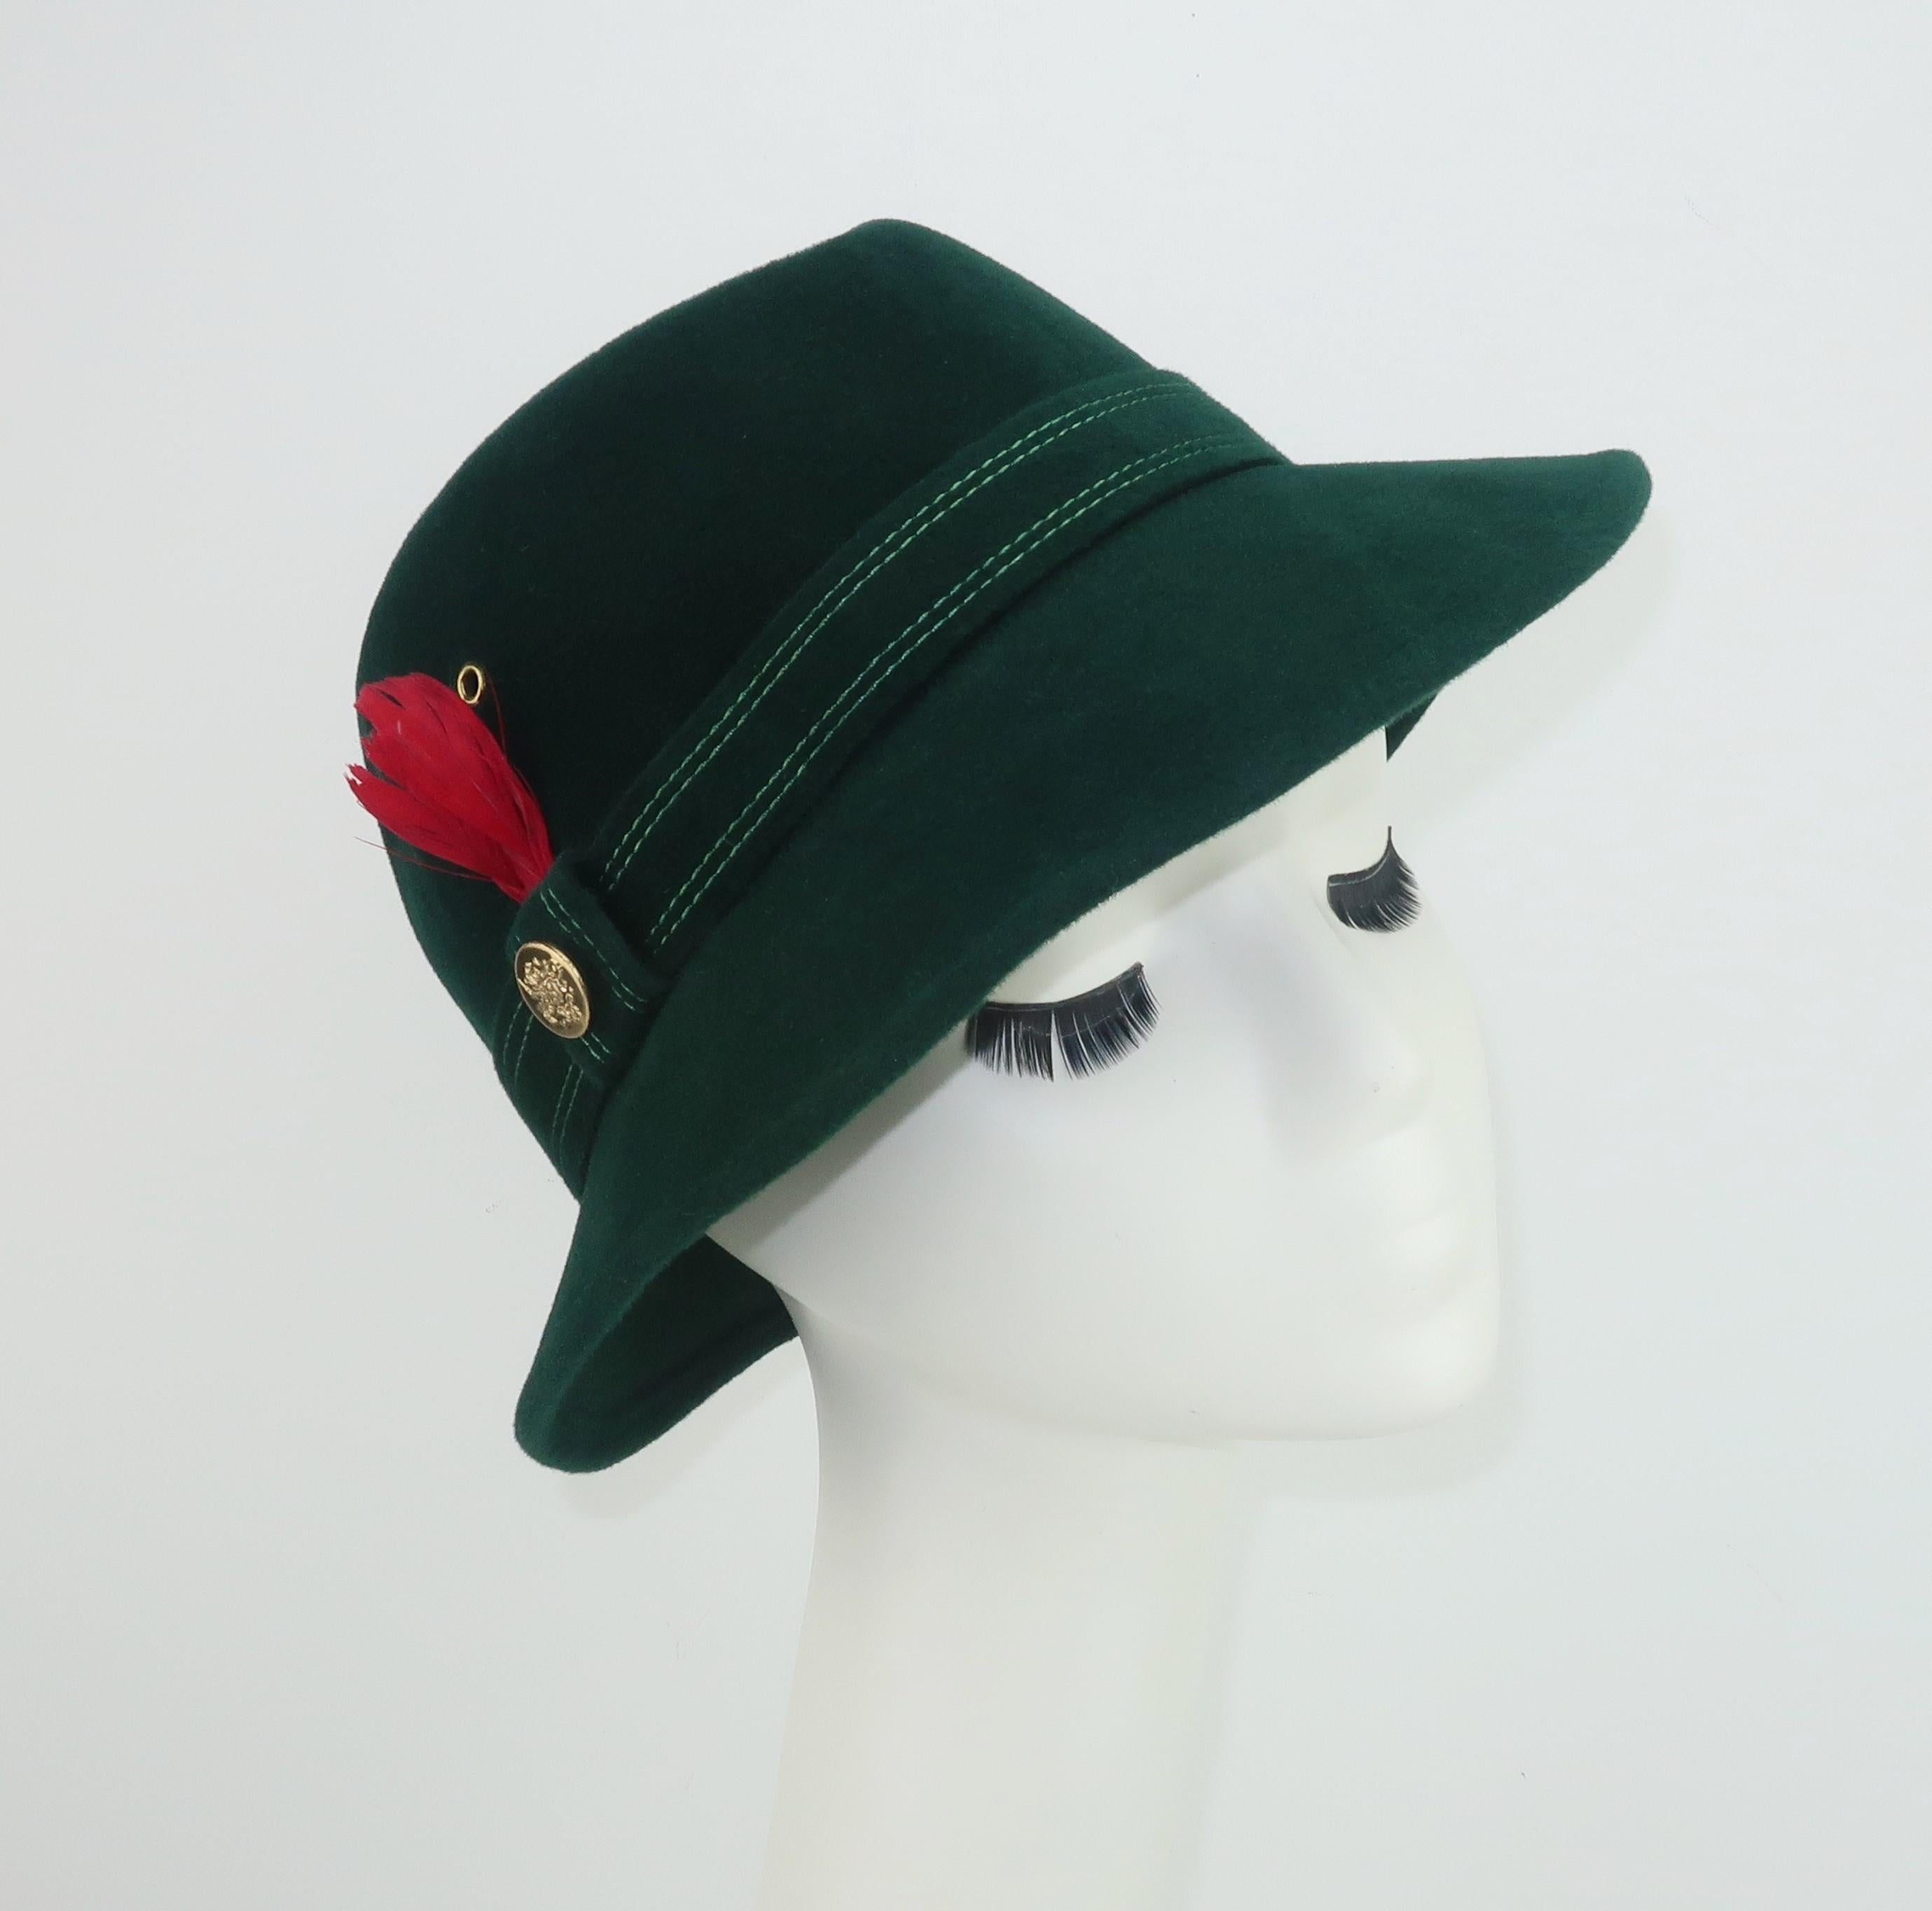 Add a distinctive Alpine touch to your tweeds and woolens with this utra stylish C.1970 Adolfo II green wool felt hat embellished with a red feather and gold button completing the classic Tyrolean look.  A menswear style perfect for accessorizing a